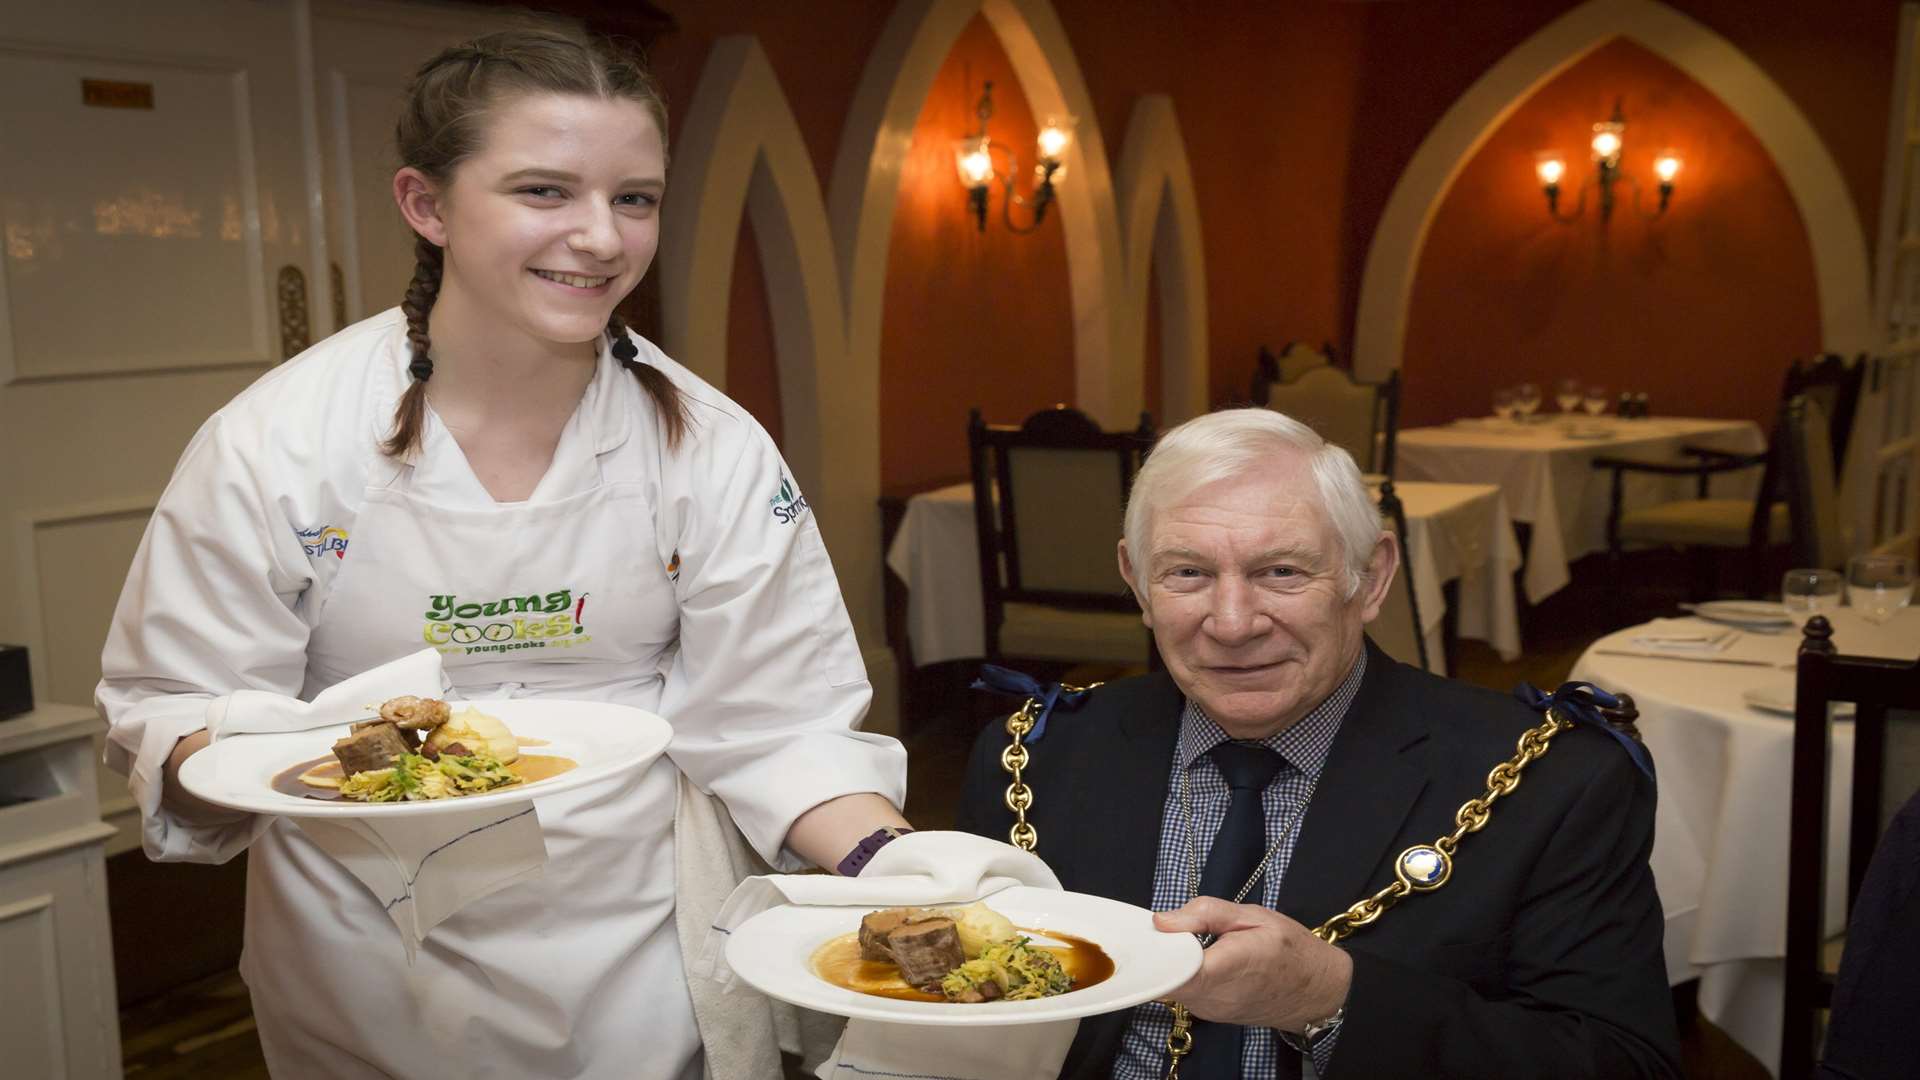 Charlotte Fife, 15, from Invicta Grammar, serves Cllr Malcolm Greer, mayor of Maidstone, at the Young Cooks VIP luncheon.